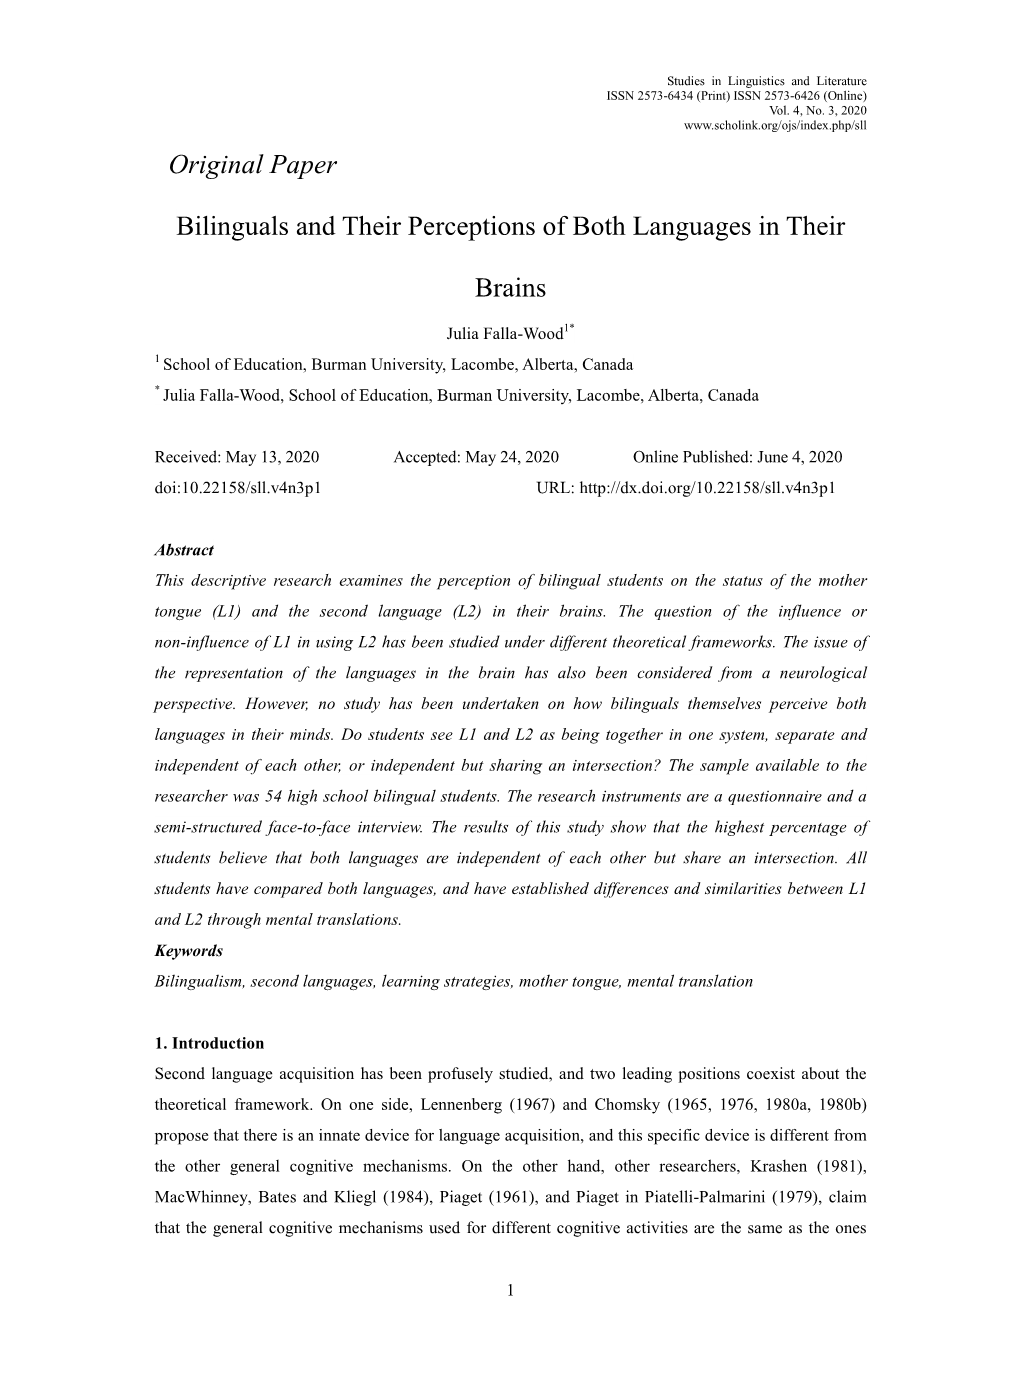 Original Paper Bilinguals and Their Perceptions of Both Languages In